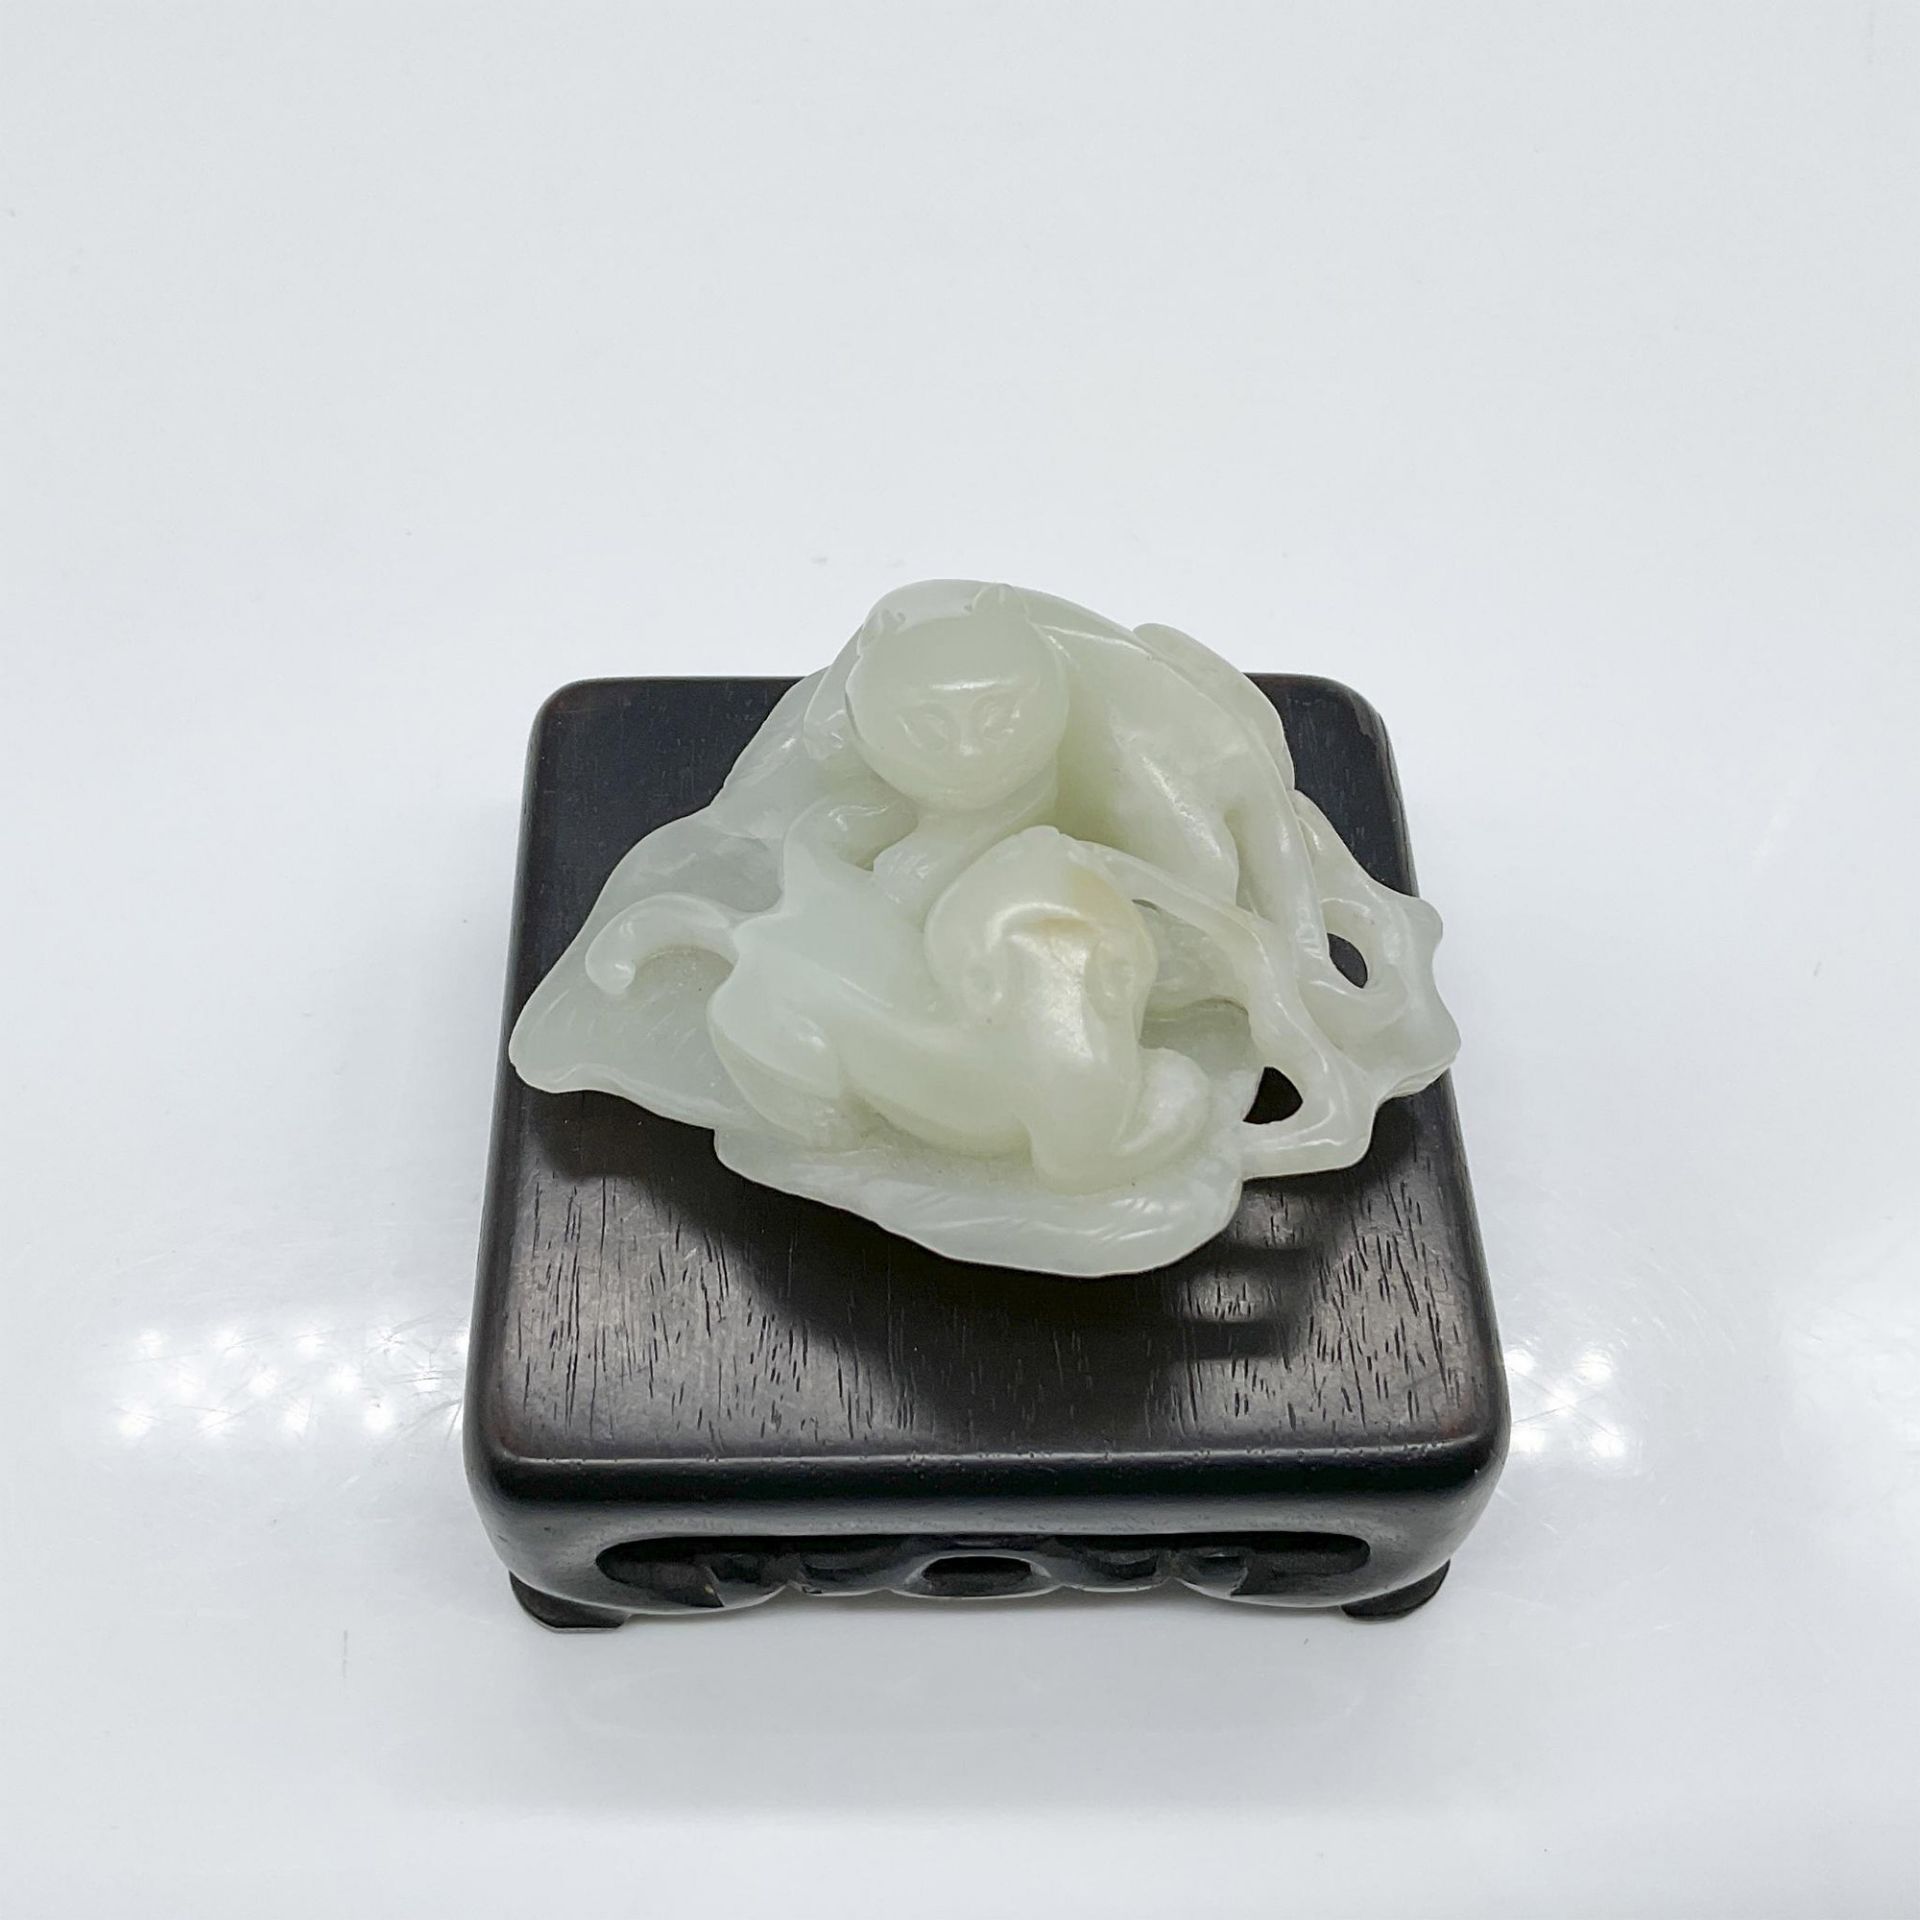 Chinese Chien Lung Period Carved White Jade Figurine - Image 3 of 4